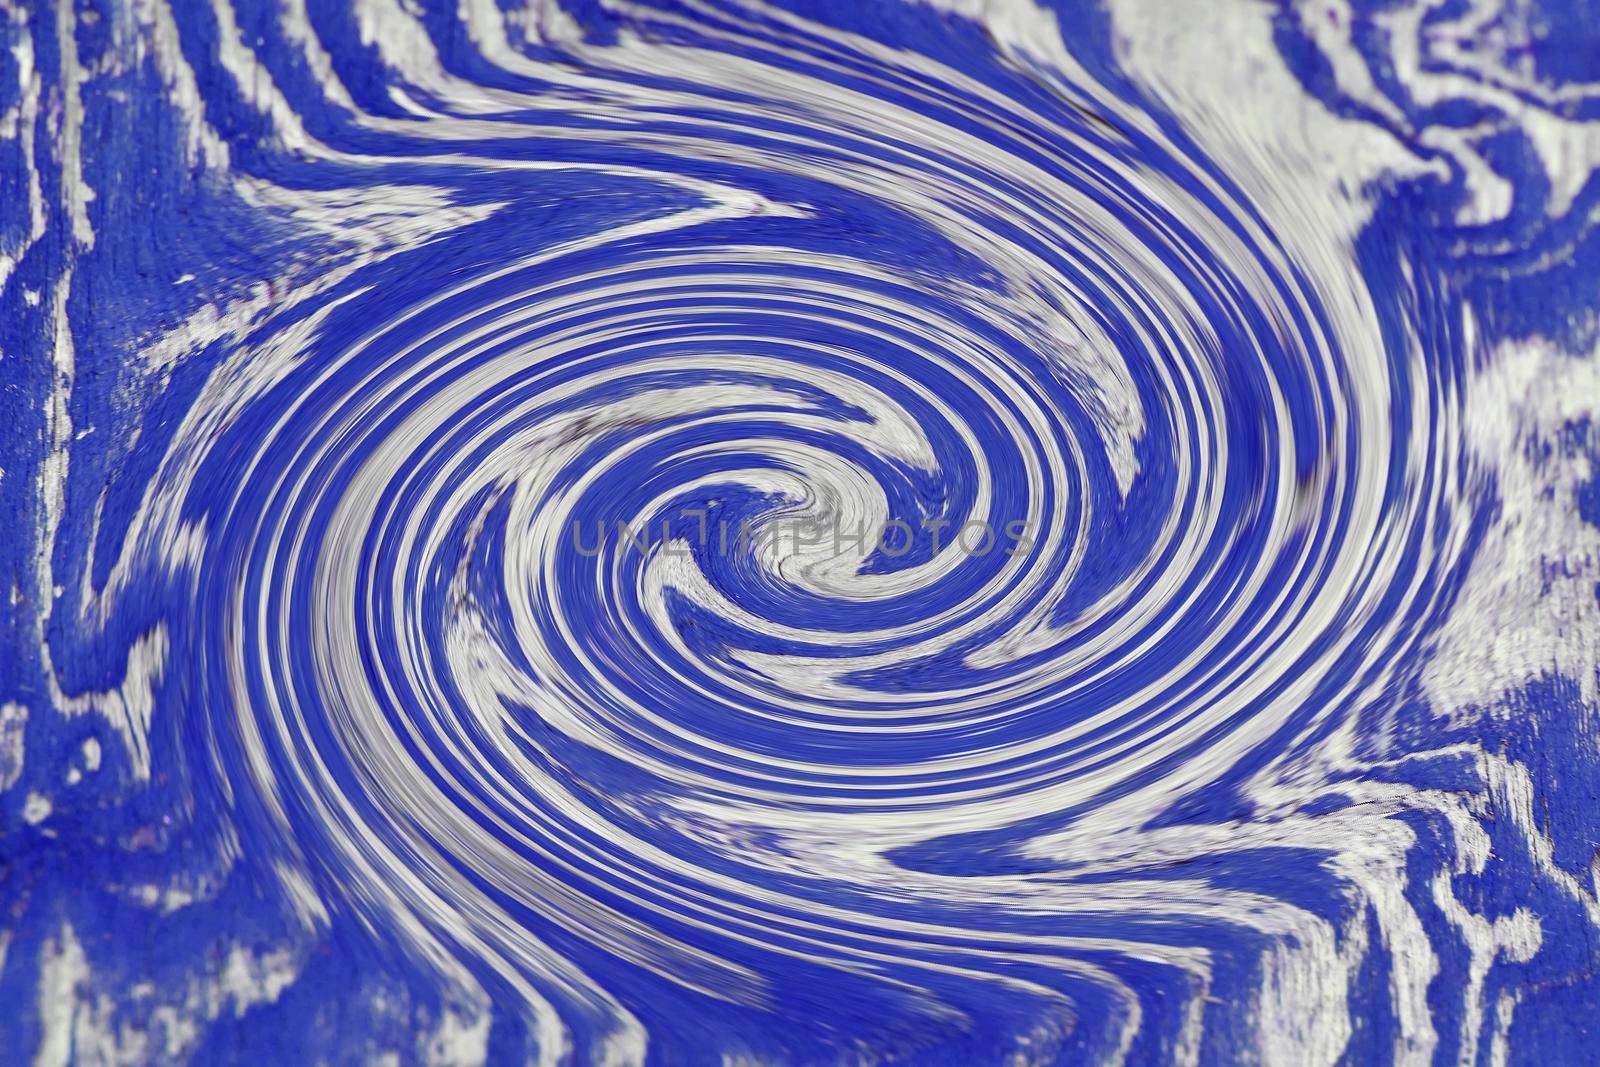 colorful spiral in blue and white by Jochen